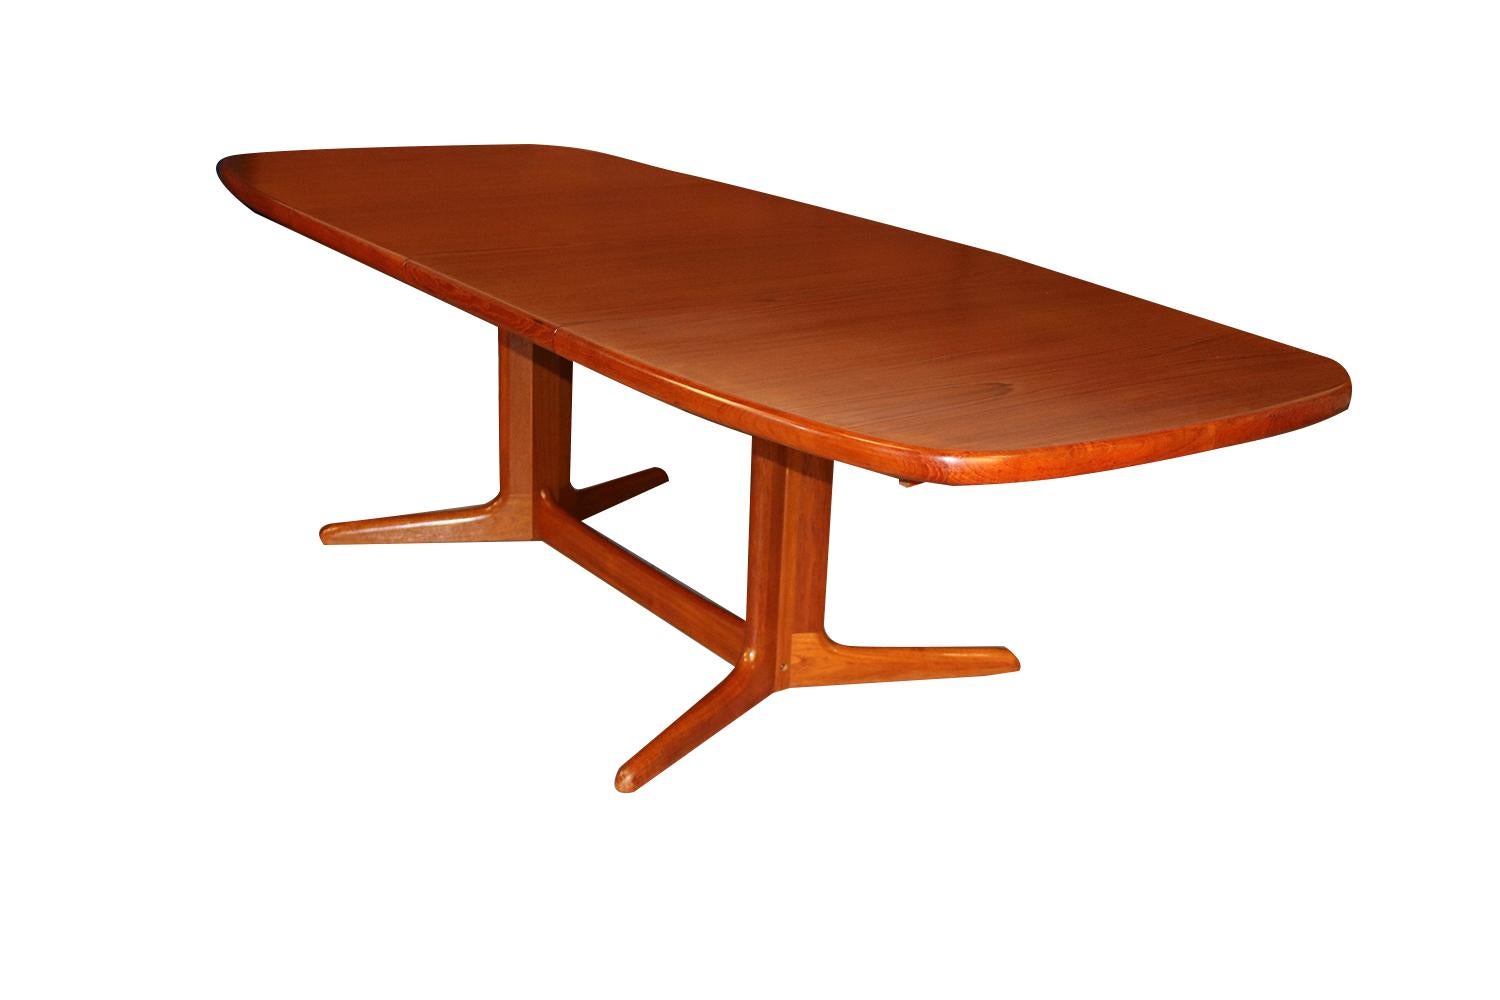 Beautiful Mid-Century Modern expandable dining table, circa 1970s. Featuring richly grained, gleaming teak and smooth, clean lines characteristic of Classic Danish design. This remarkable dining table comes with two extension leaves to accommodate